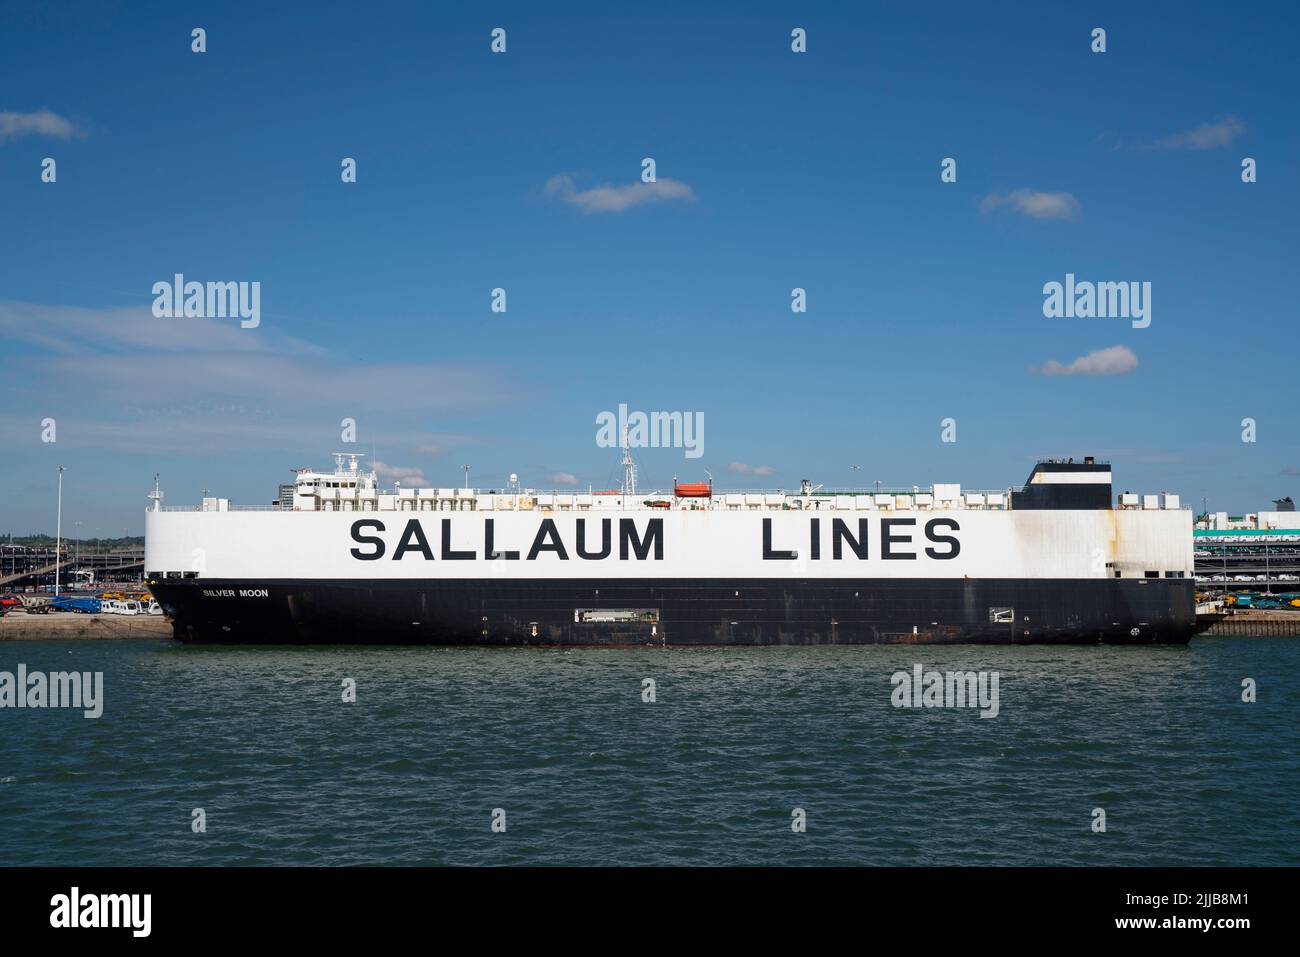 Sallaum Lines Silver Moon vehicle carrier ship docked at Southampton Docks Stock Photo